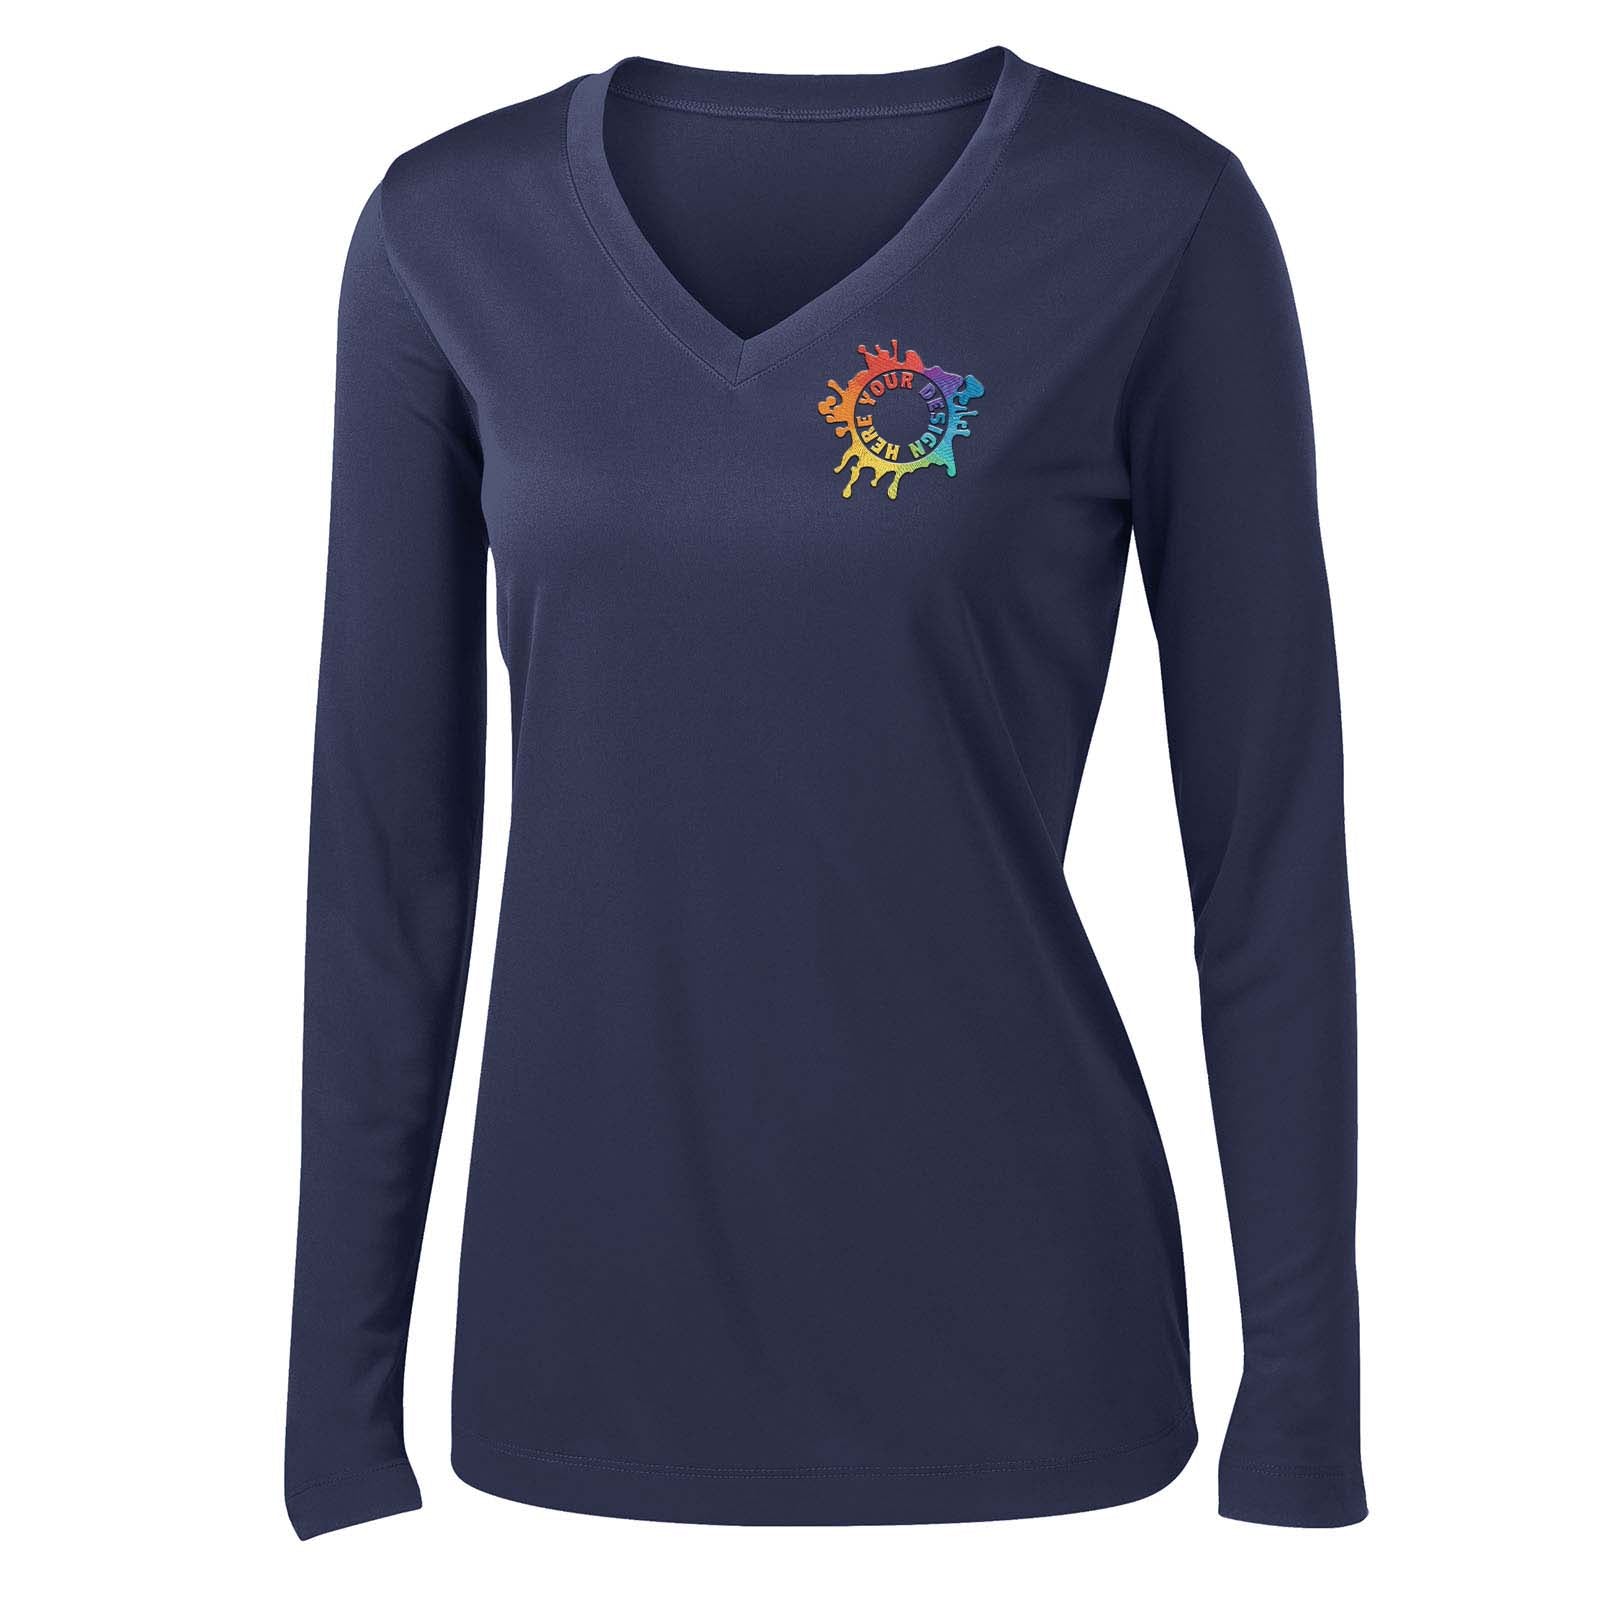 Mato & Hash Women's Performance Polyester Long Sleeve V-Neck T-Shirt Embroidery - Mato & Hash